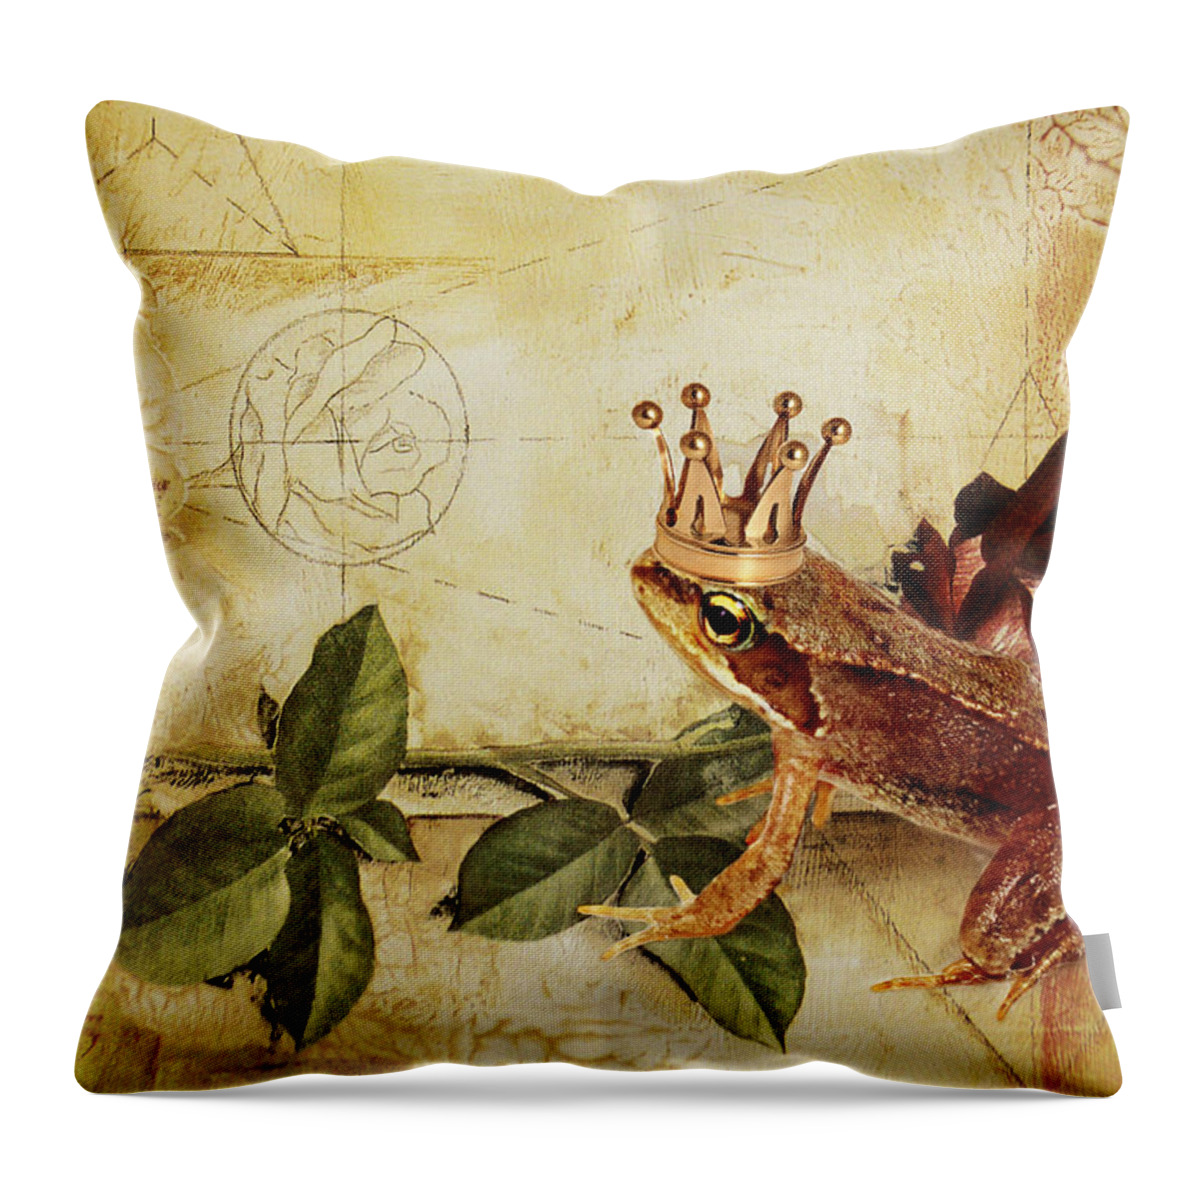 Frog Throw Pillow featuring the mixed media Frog Prince by Heike Hultsch